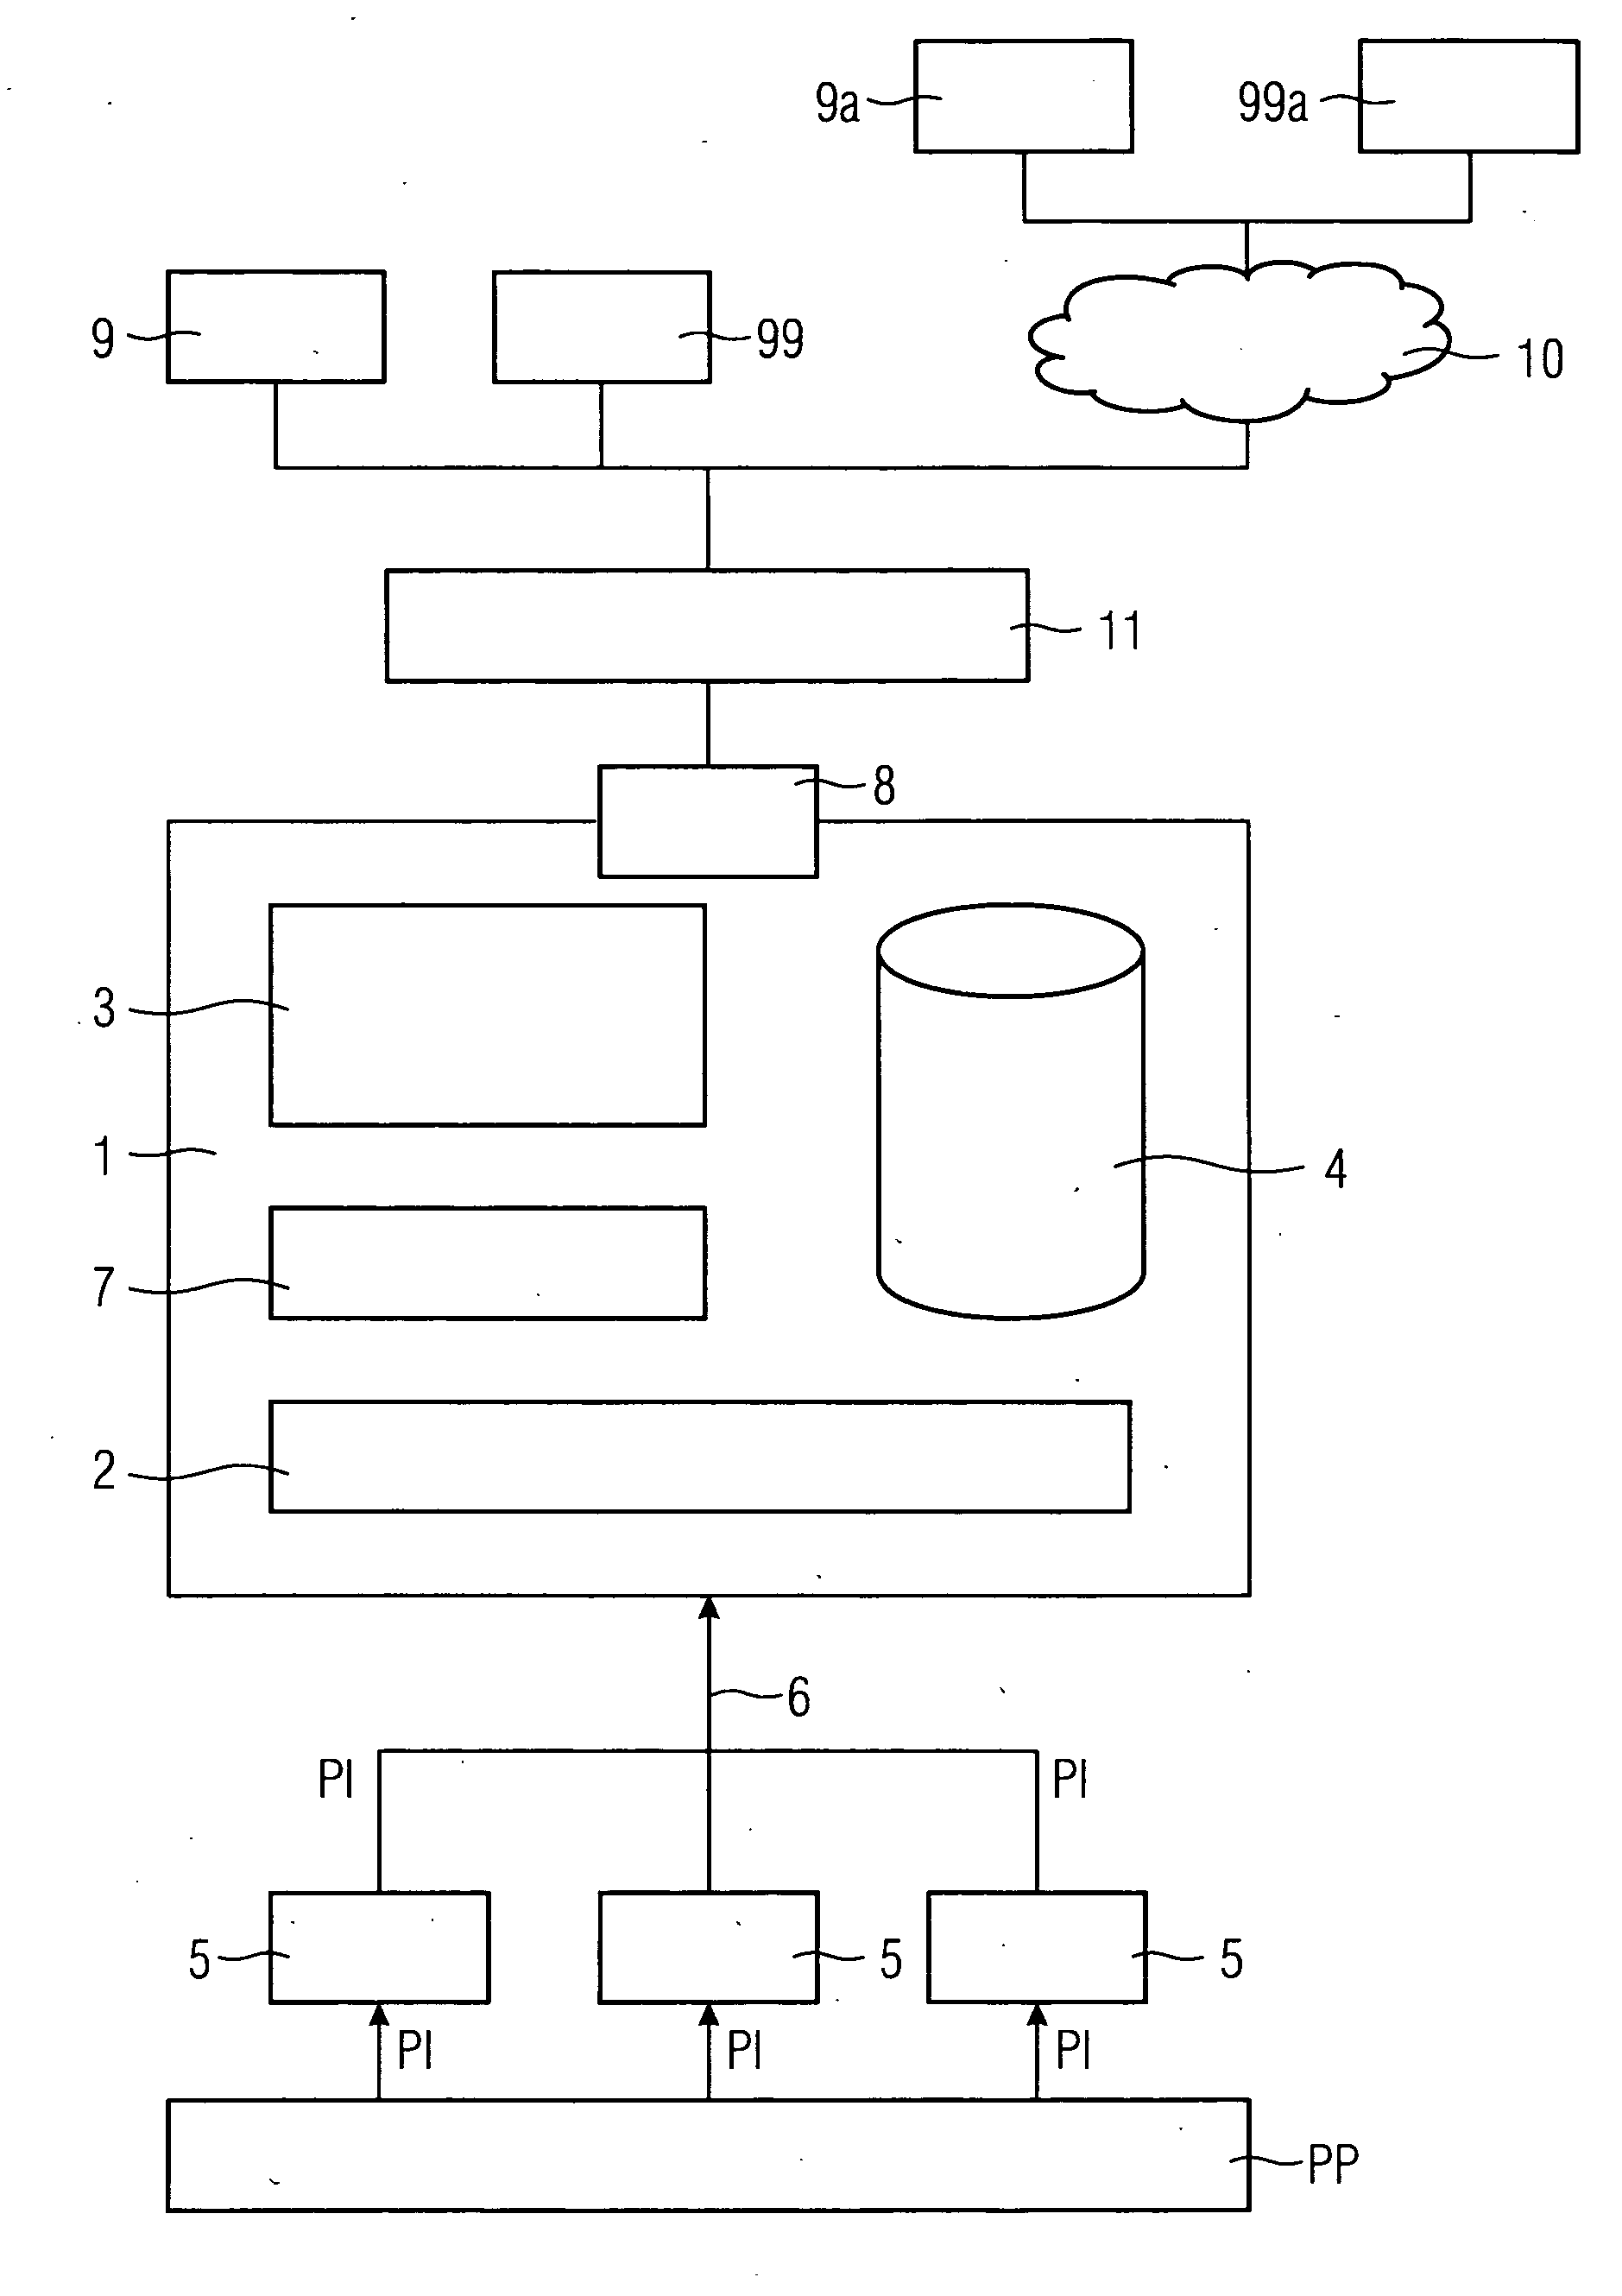 System for operating and monitoring having integrated historian functionality